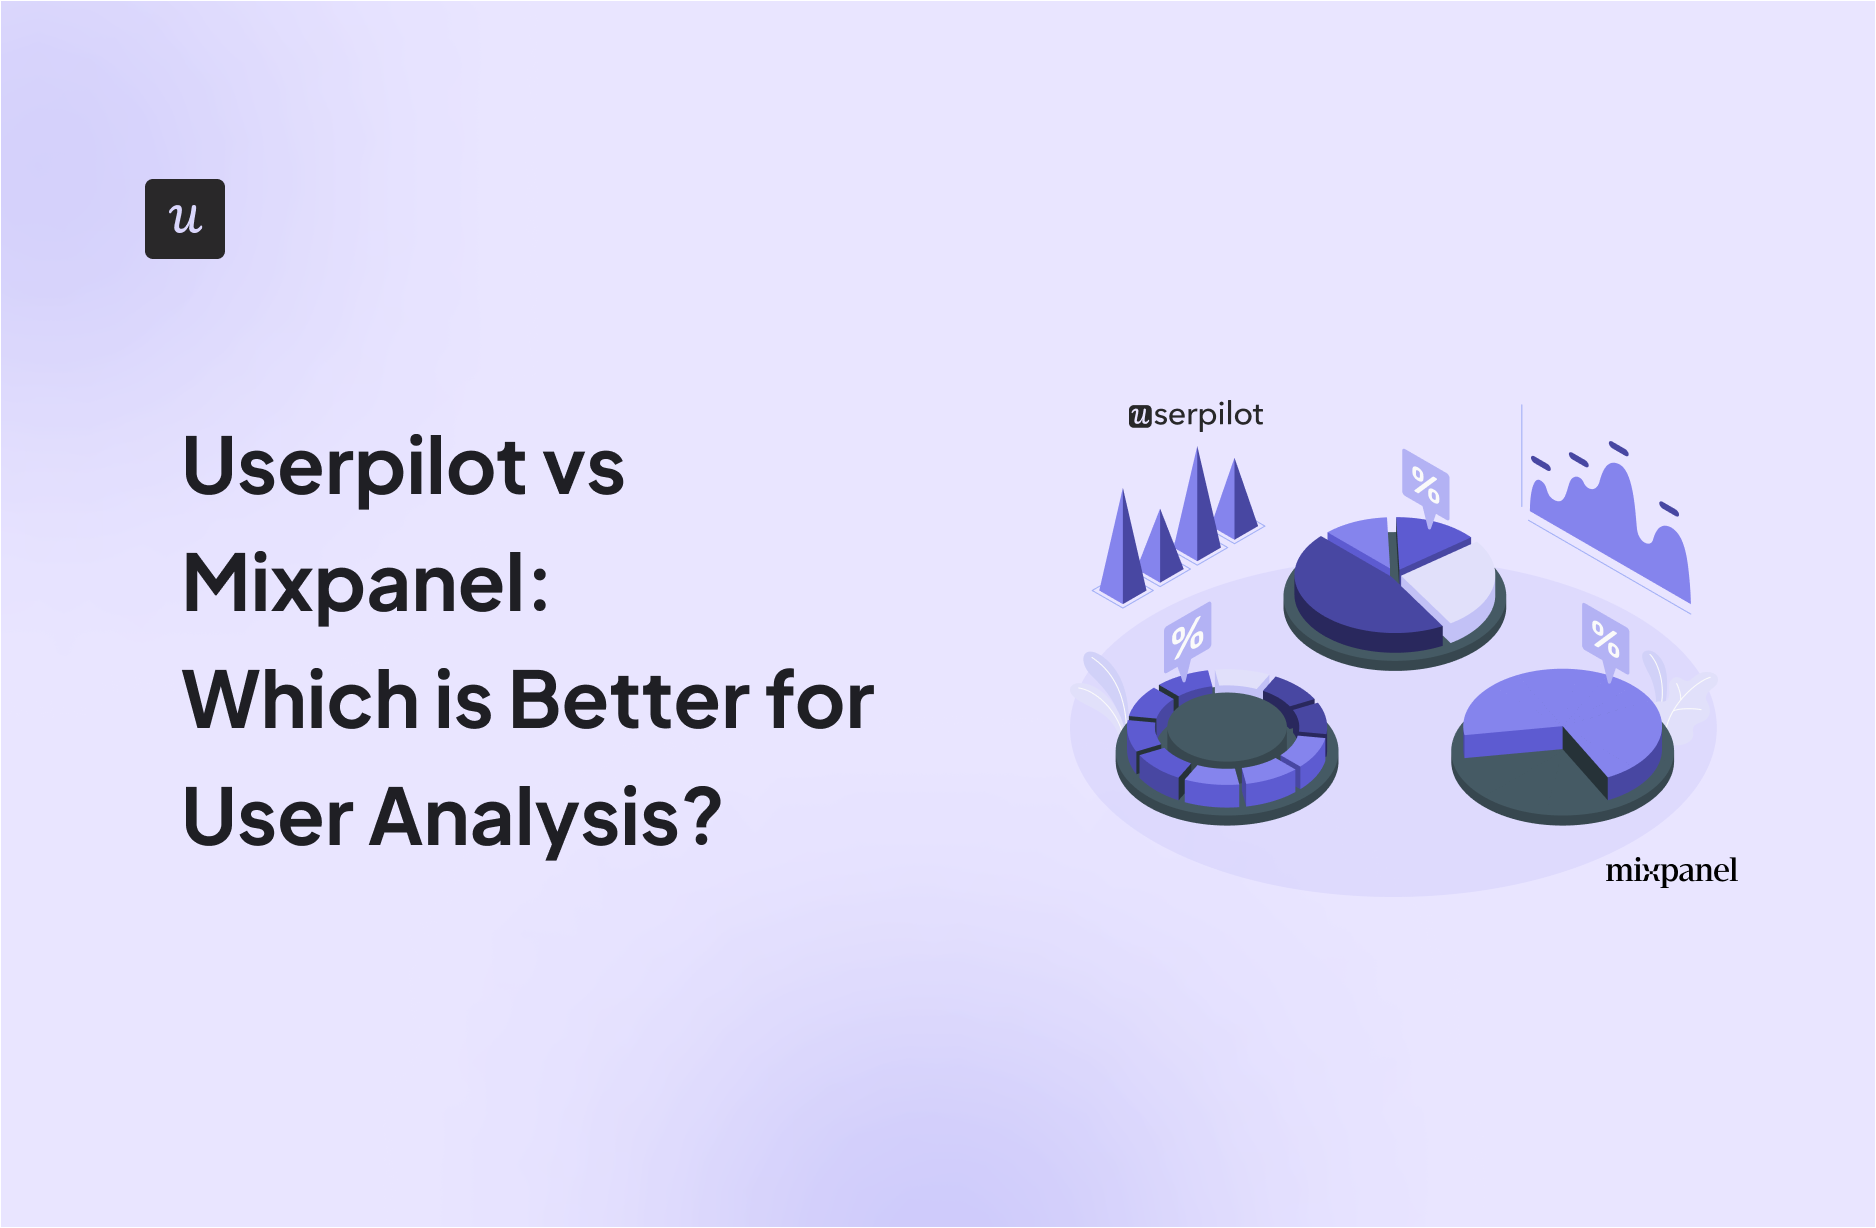 Userpilot vs Mixpanel: Which is Better for User Analysis?